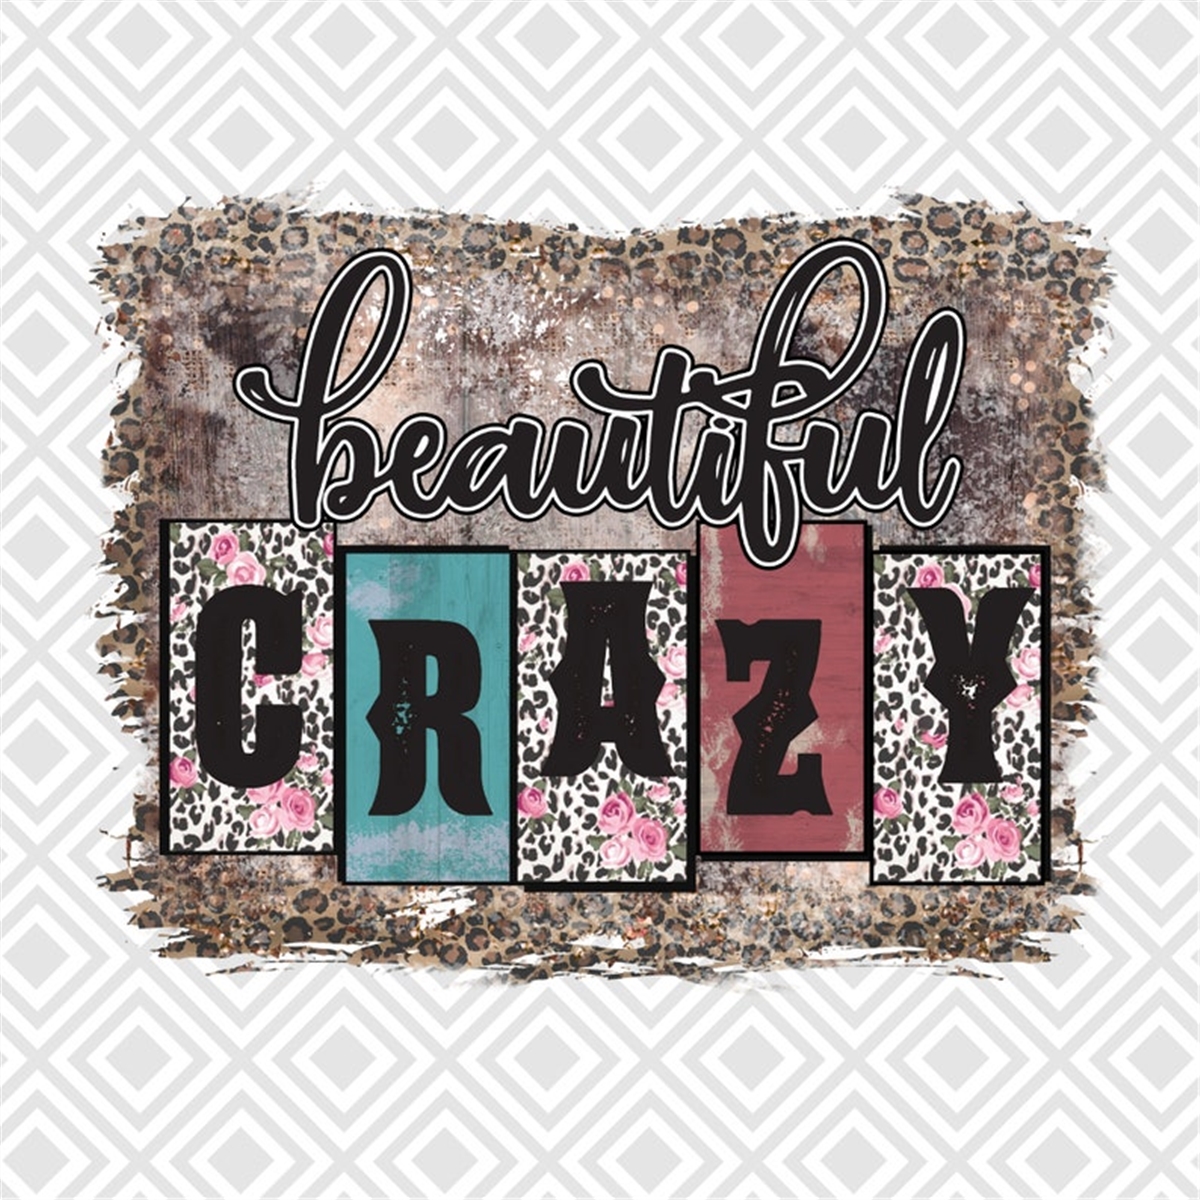 beautiful-crazy-png-country-music-country-song-beautiful-crazy-song-floral-western-vintage-leopard-designsublimation-designs-downloads